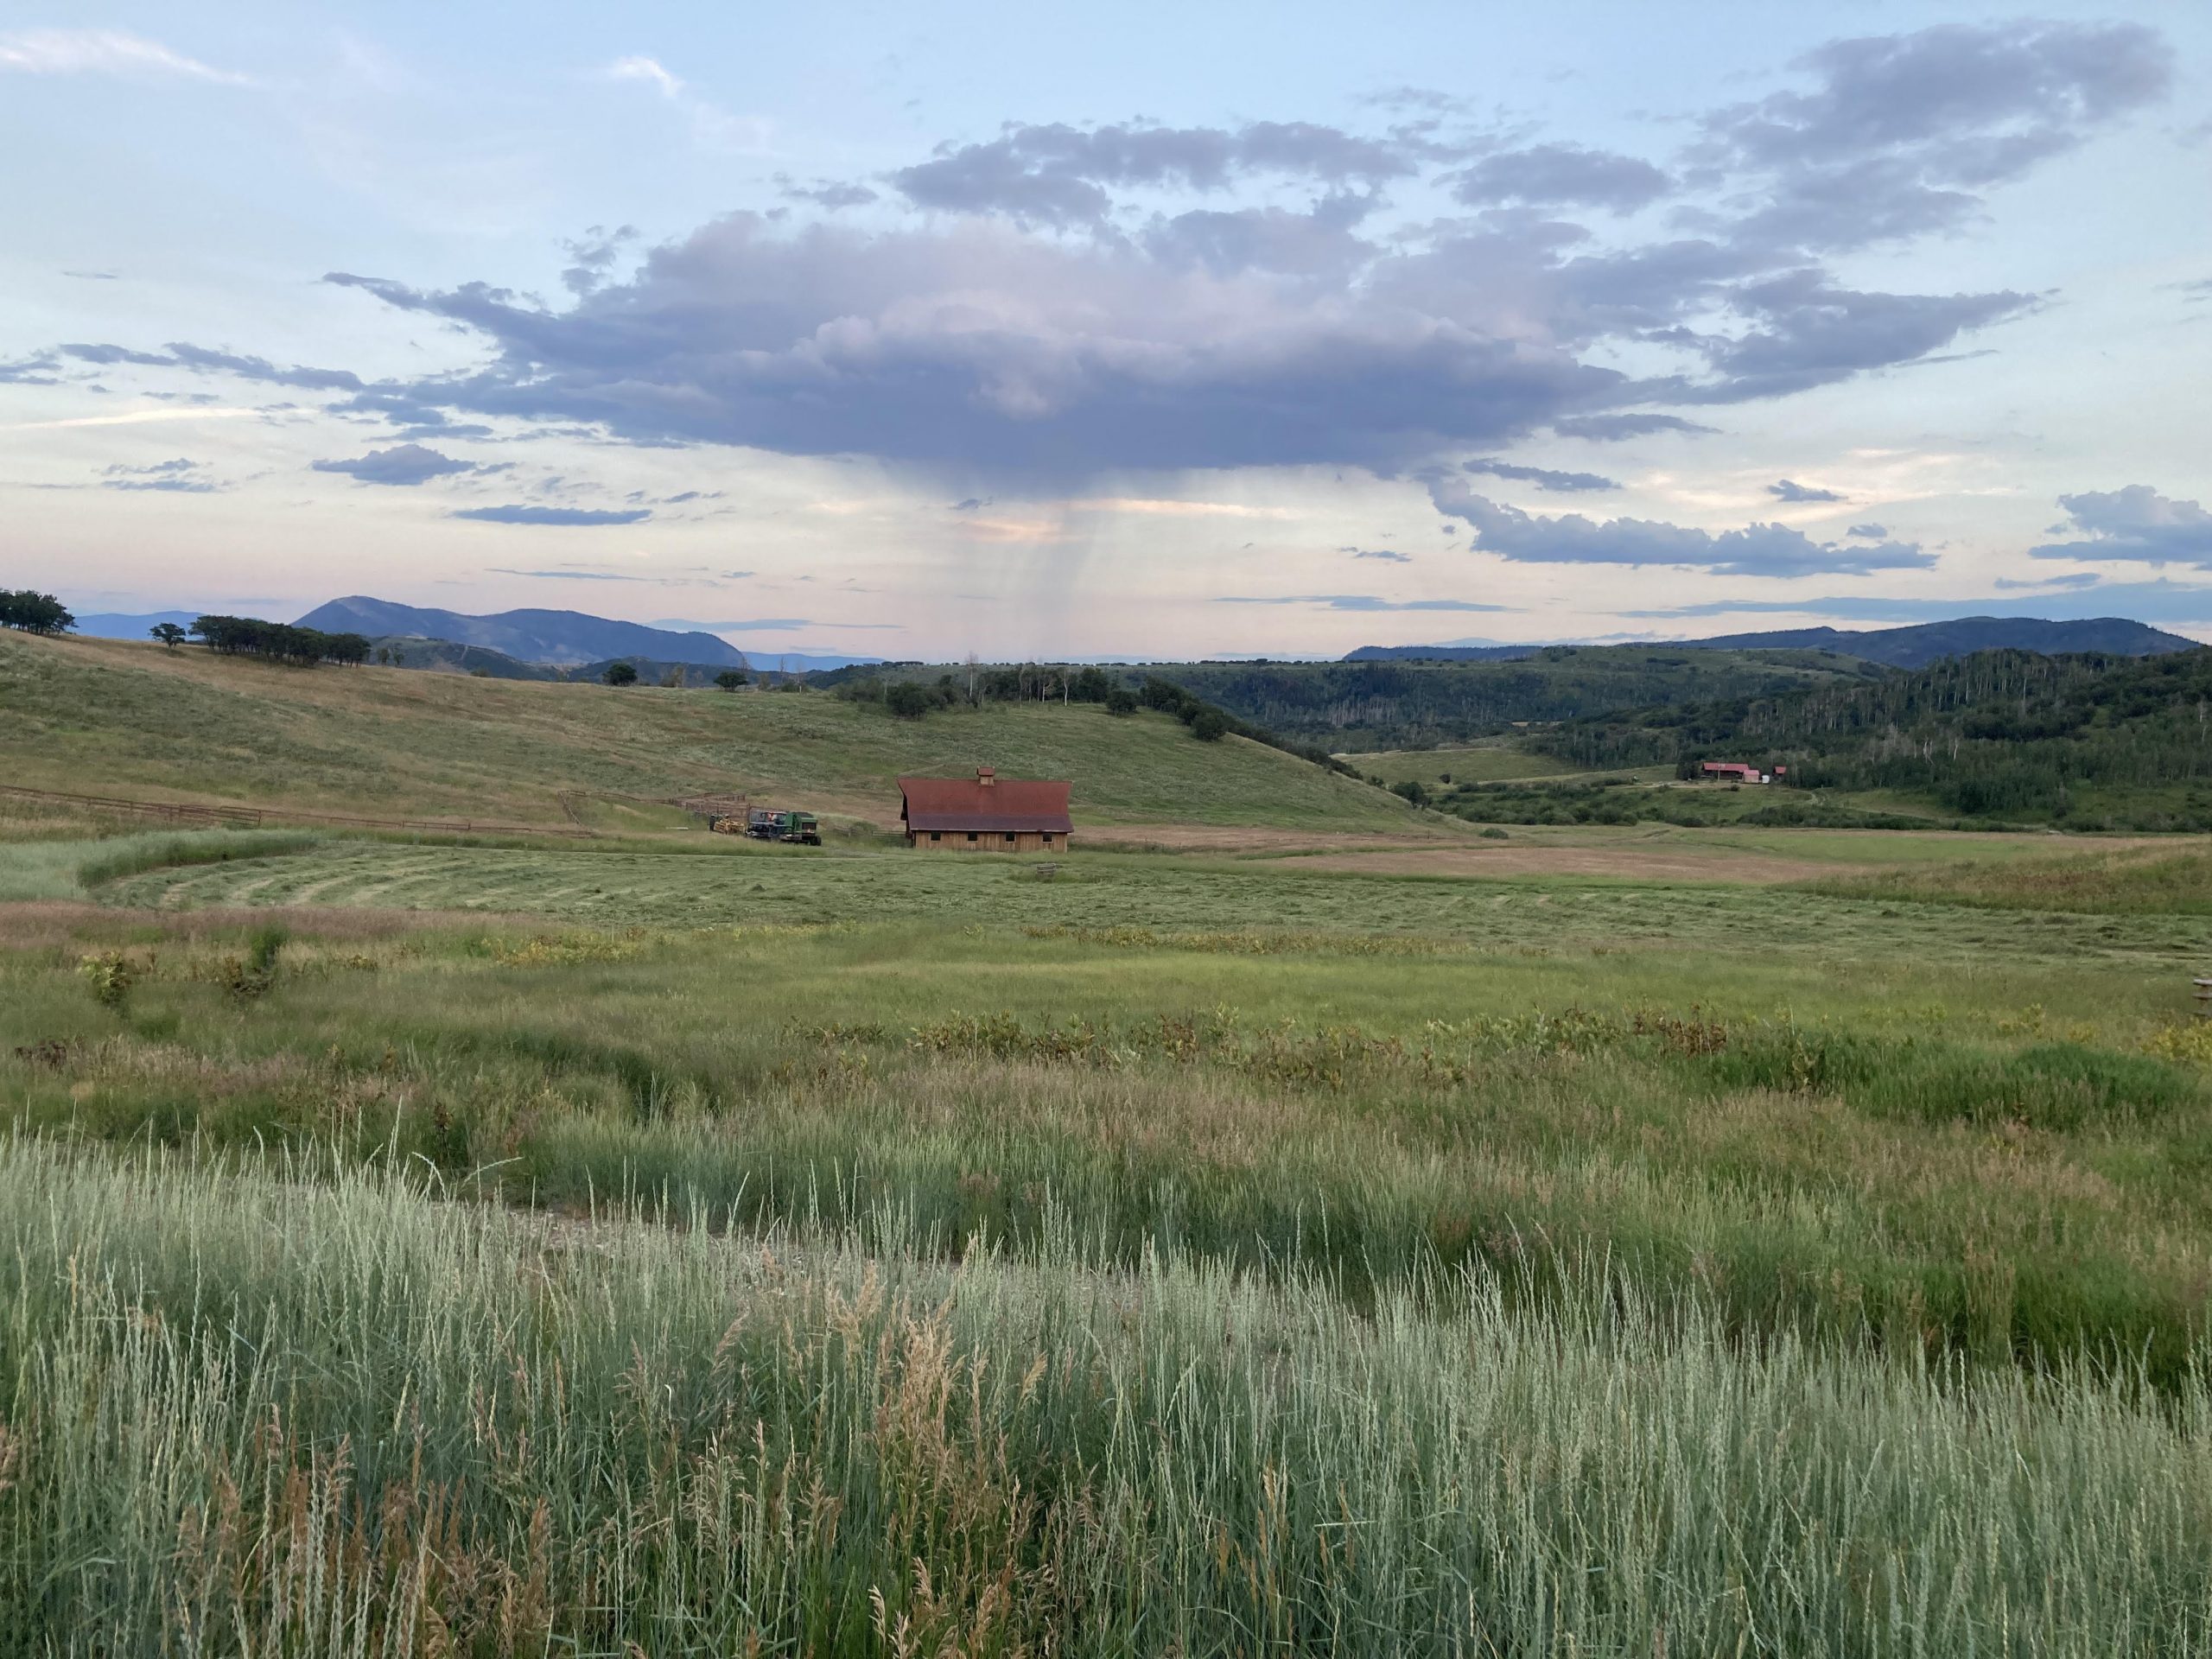 Colorado’s 35-acre rule can impact larger ranches, too